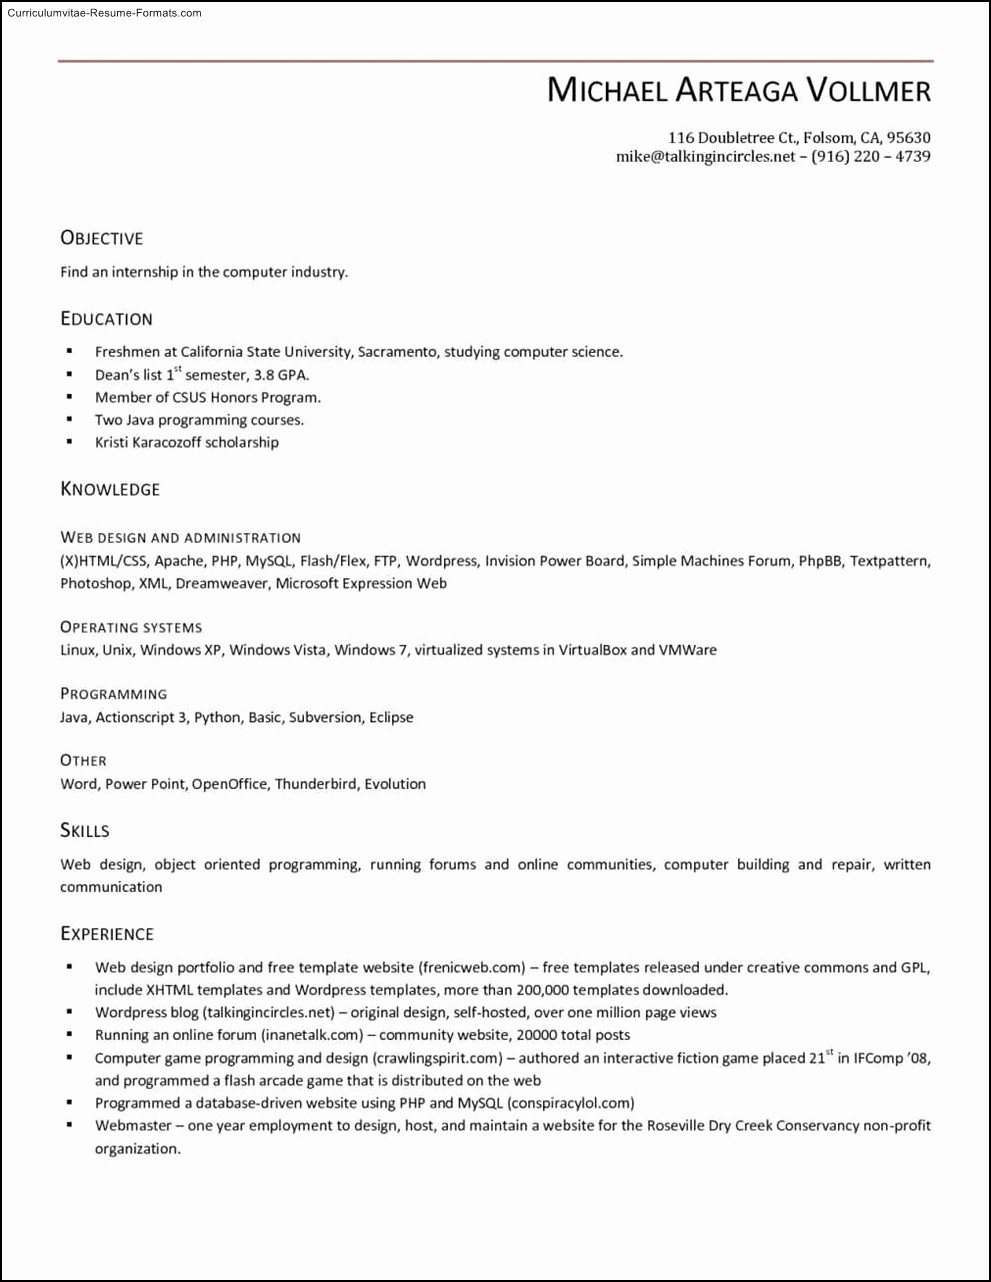 Microsoft Office Online Resume Template New Microsoft Fice 2003 Resume Templates Free Samples